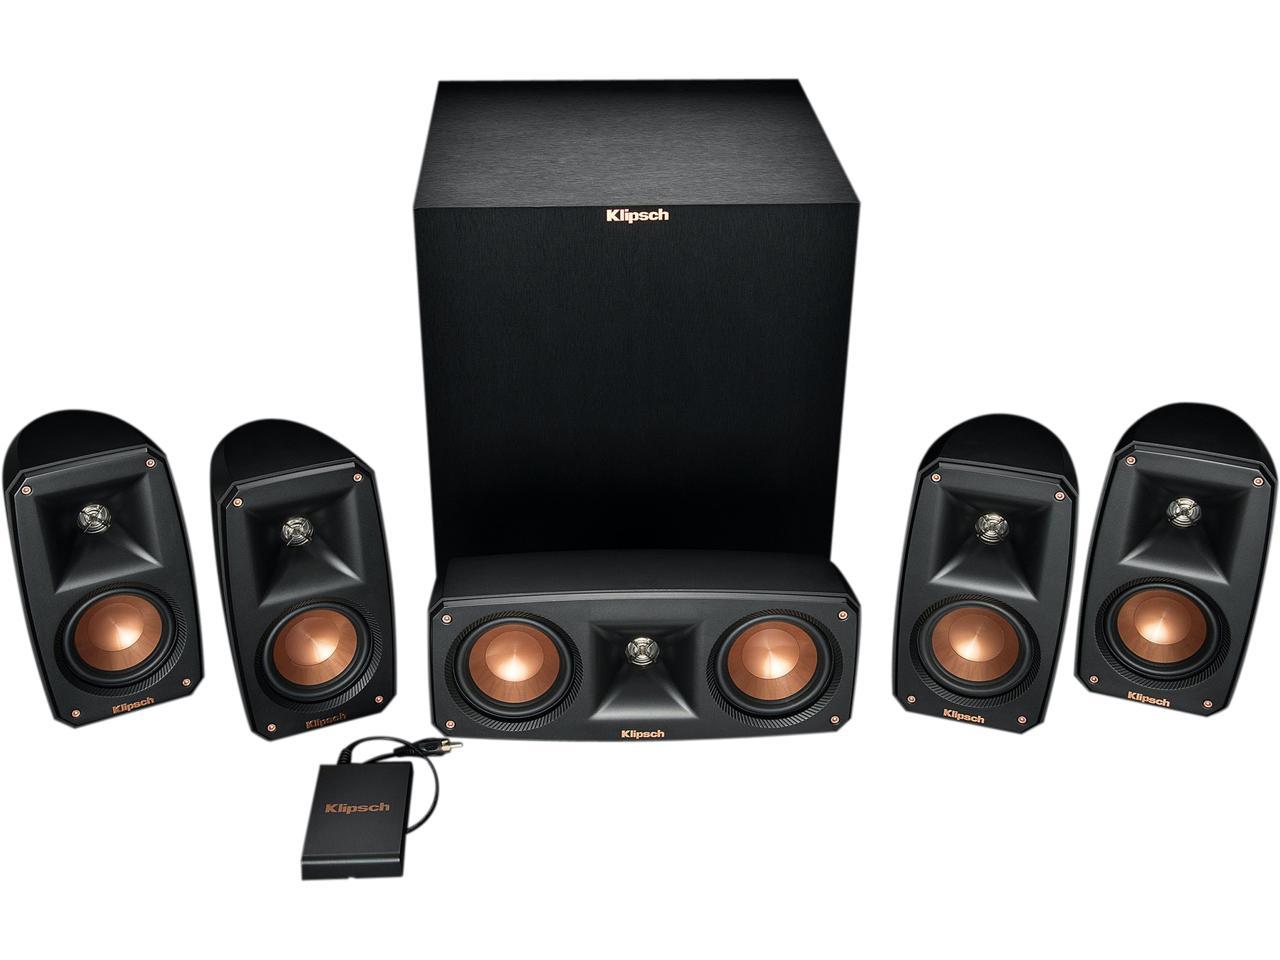 Klipsch Reference Theater Pack 5.1 Channel Surround Sound System at Newegg $289